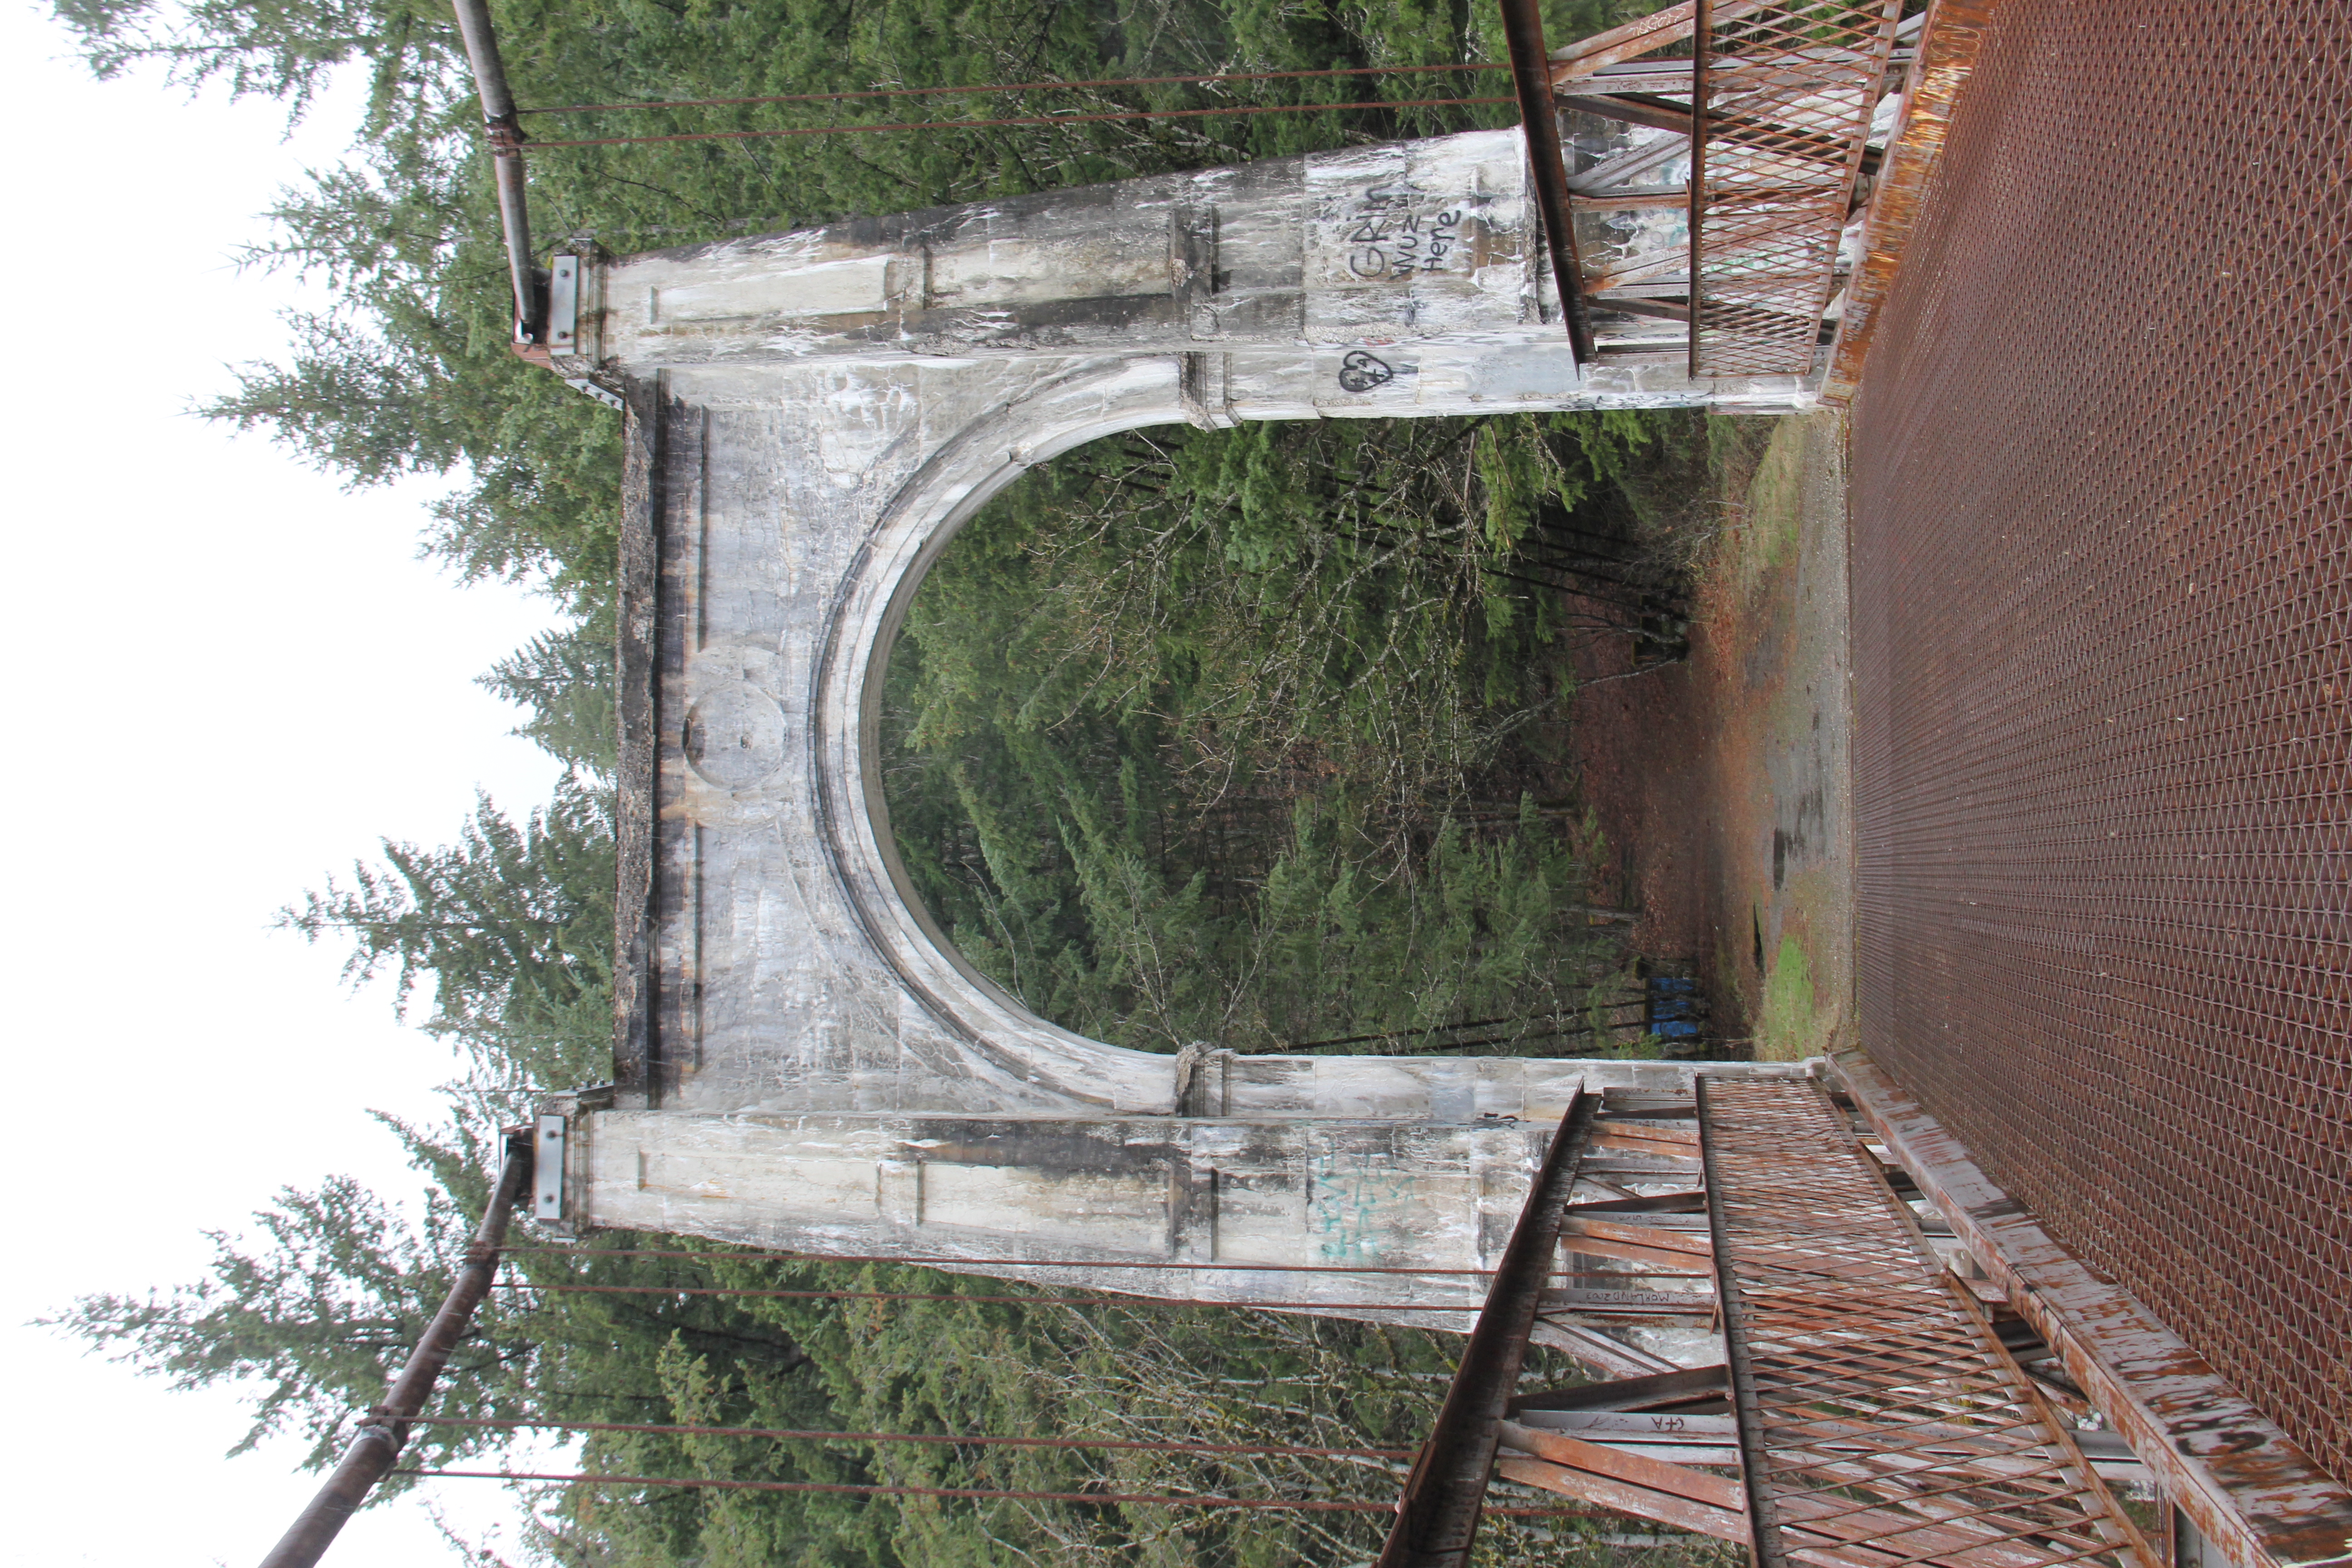 A bridge with a large supporting white arch leads into a forested area.